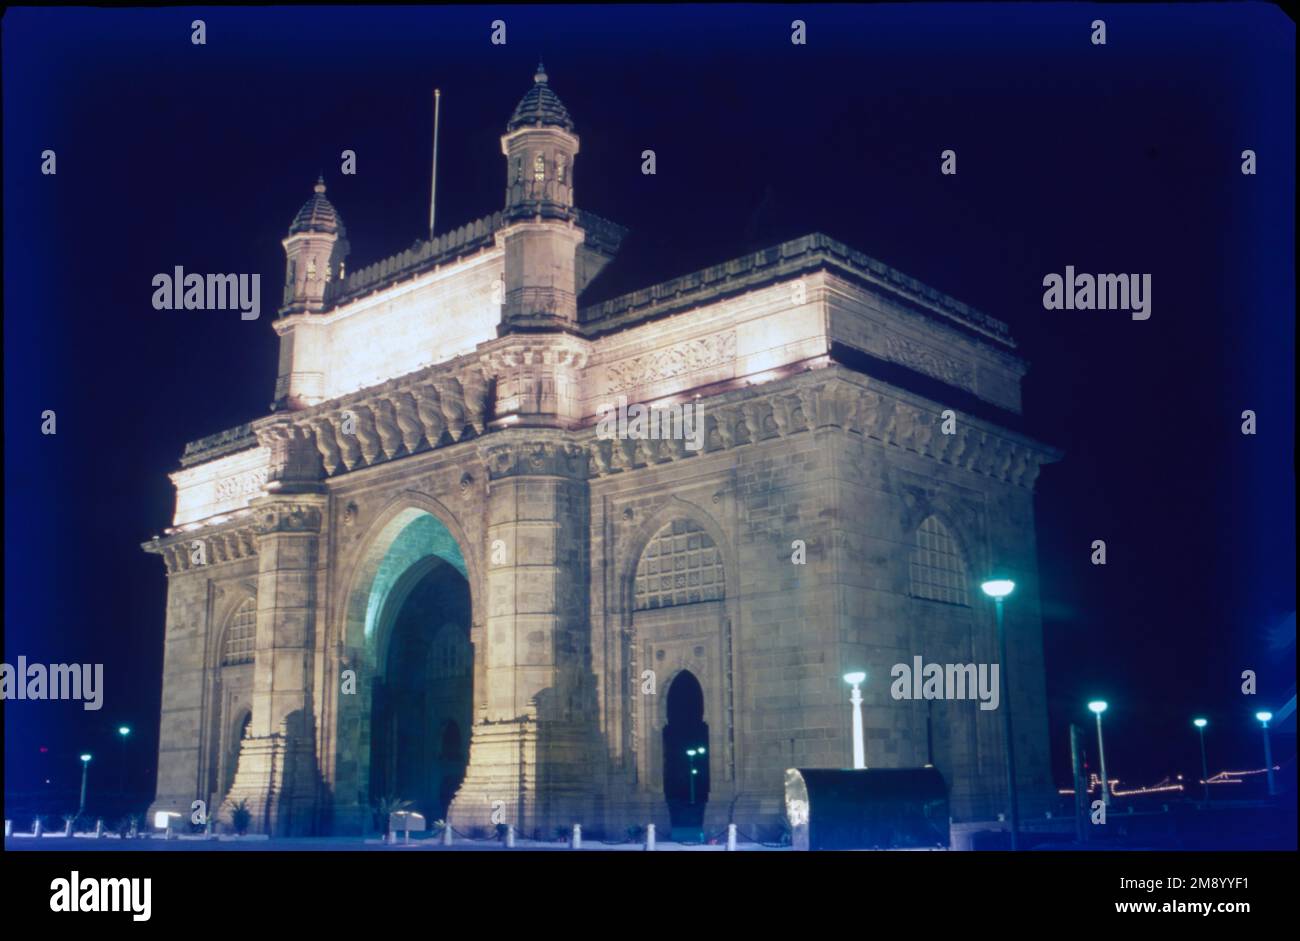 The Gateway of India is an arch-monument built in the early 20th century in the city of Mumbai, India. It was erected to commemorate the landing of King-Emperor George V, the first British monarch to visit India, in December 1911 at Strand Road near Wellington Fountain. Stock Photo